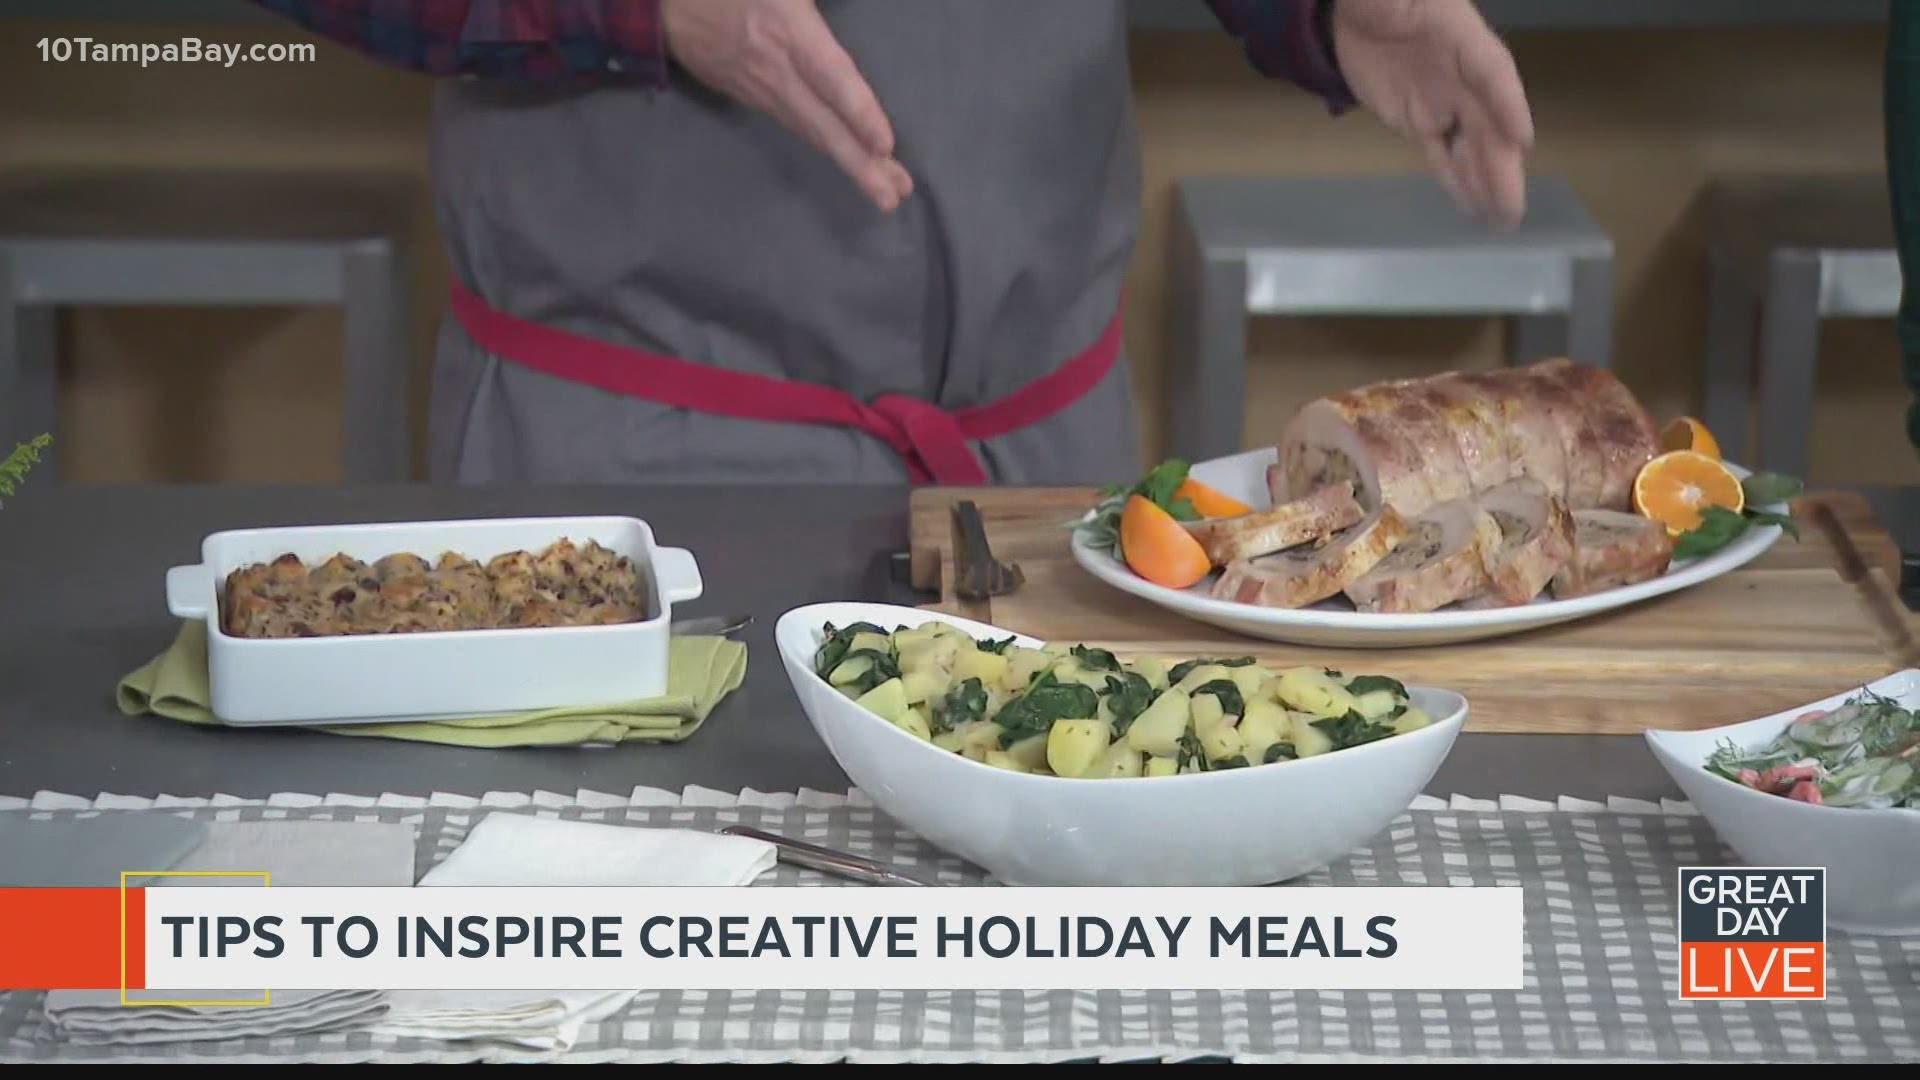 Tips for home cooks to inspire creative holiday meals